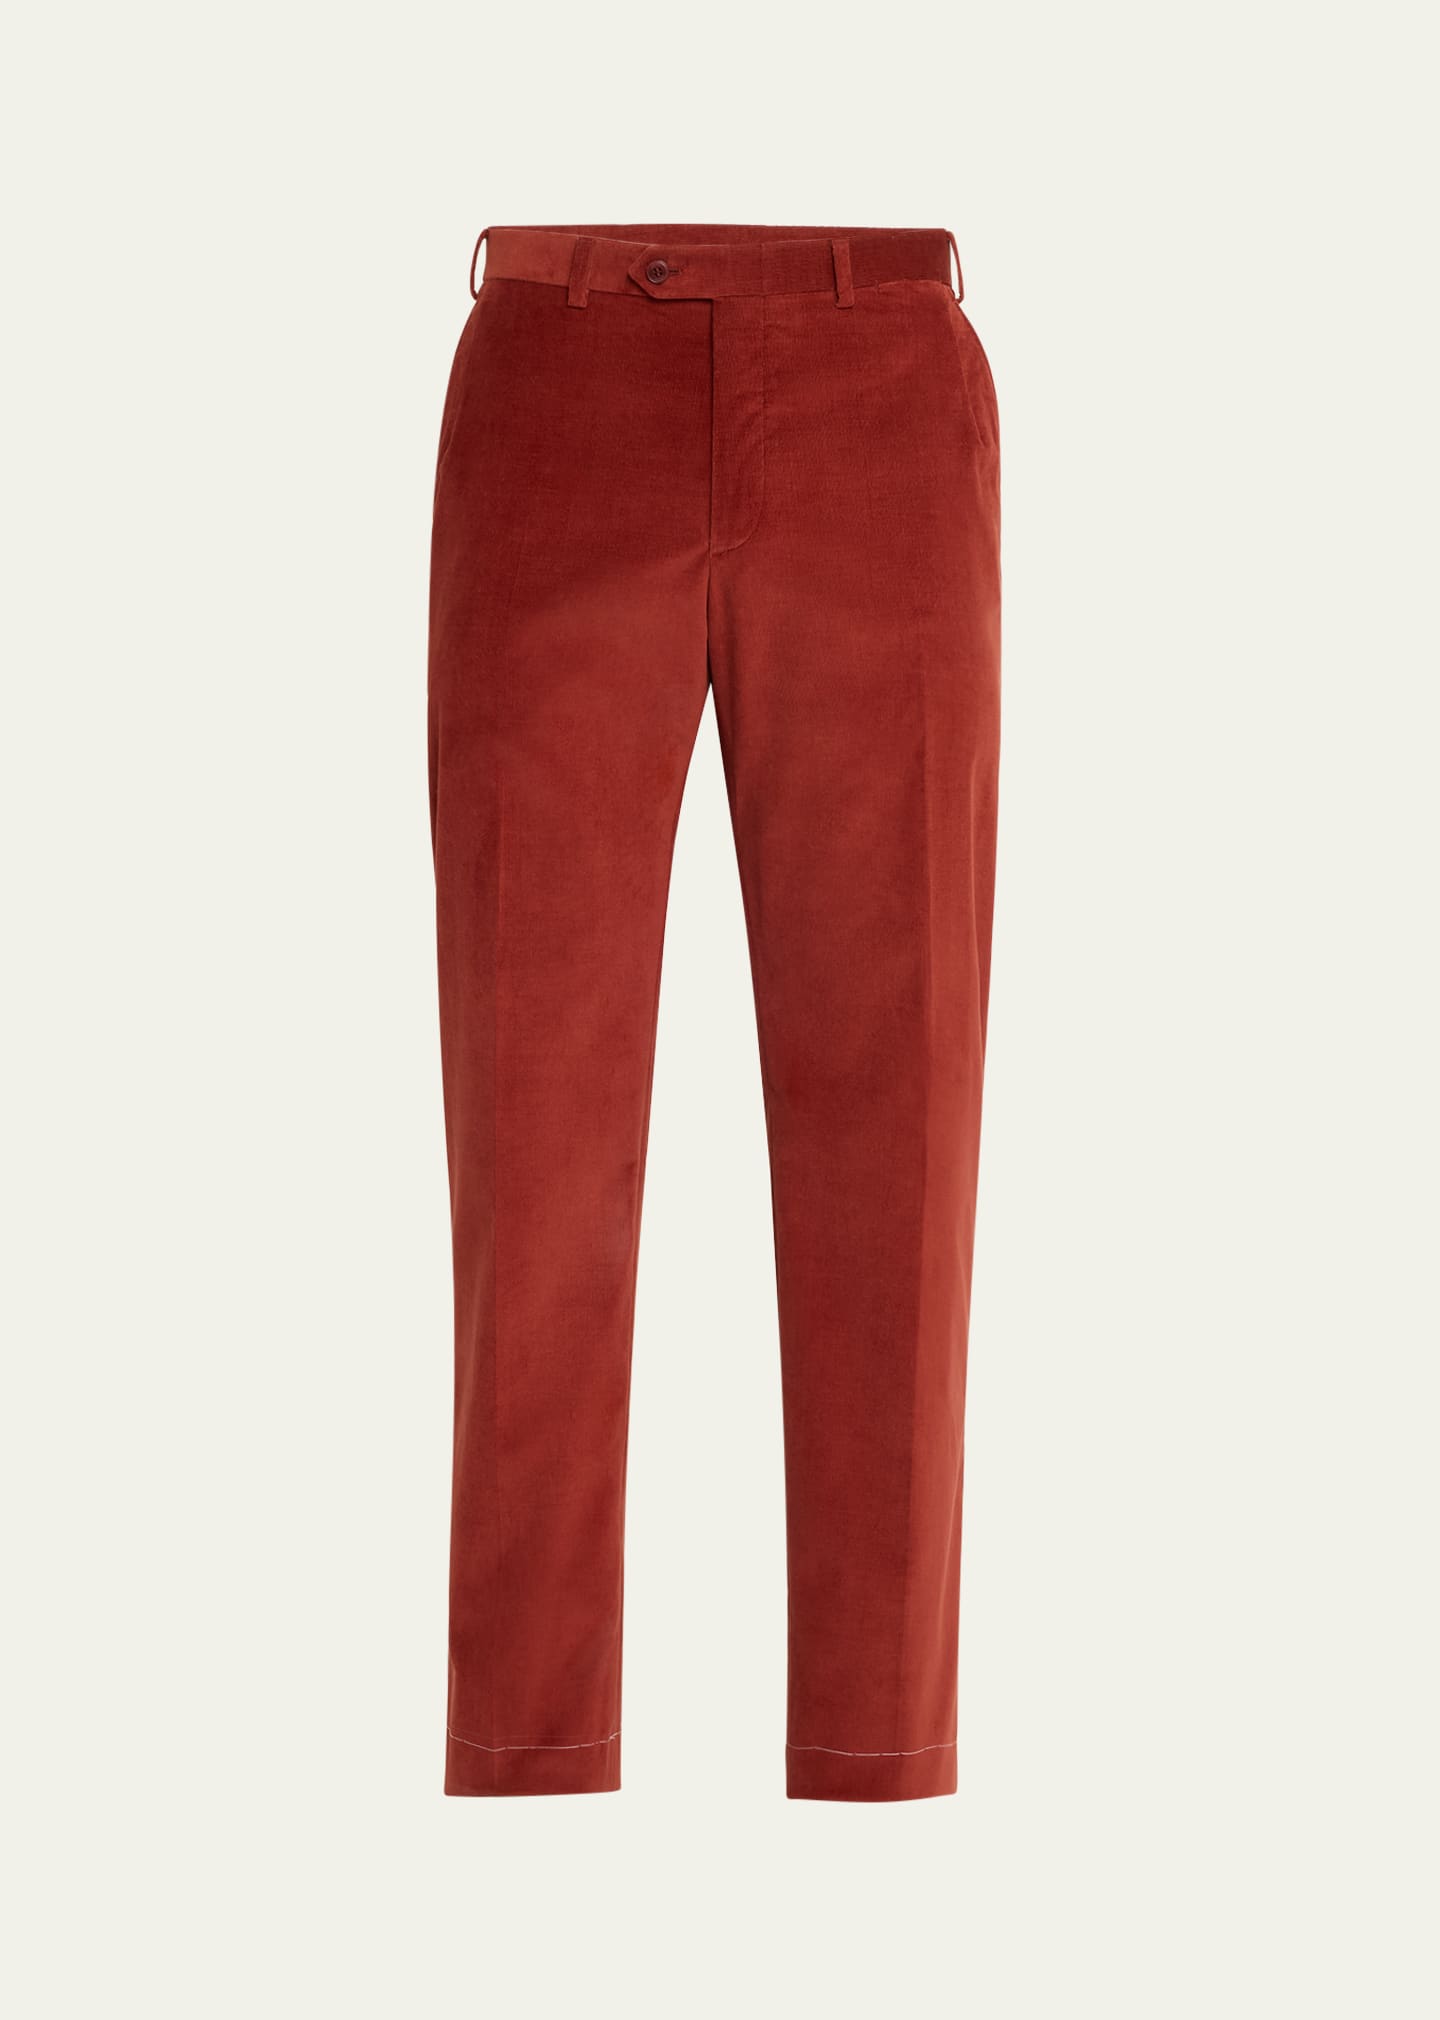 Brioni Men's Micro-corduroy Flat Front Pants In Red